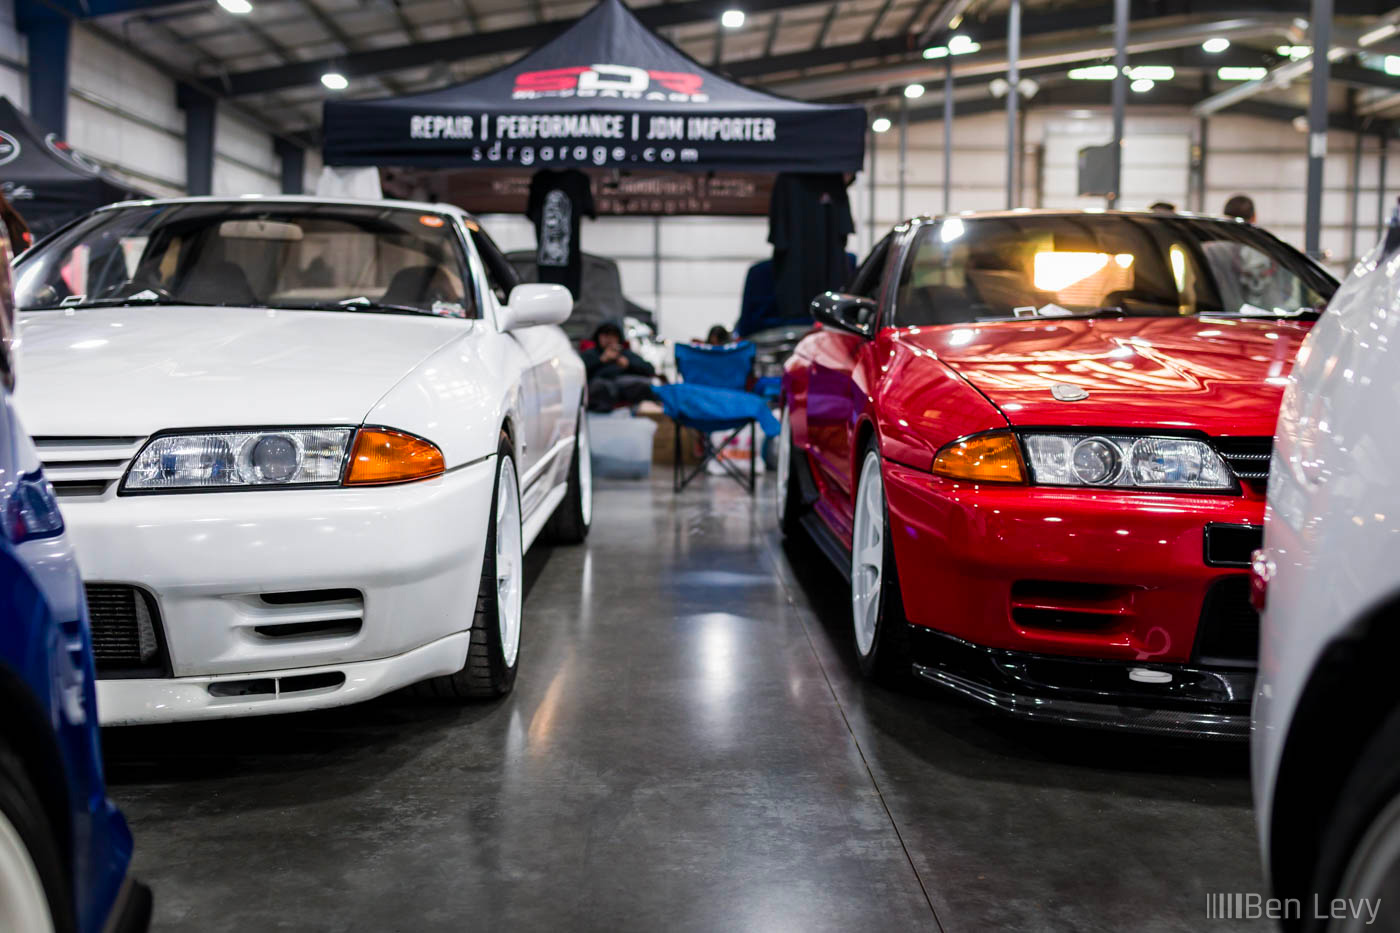 Pair of R32 Nissan Skylines at Cars and Culture Car Show